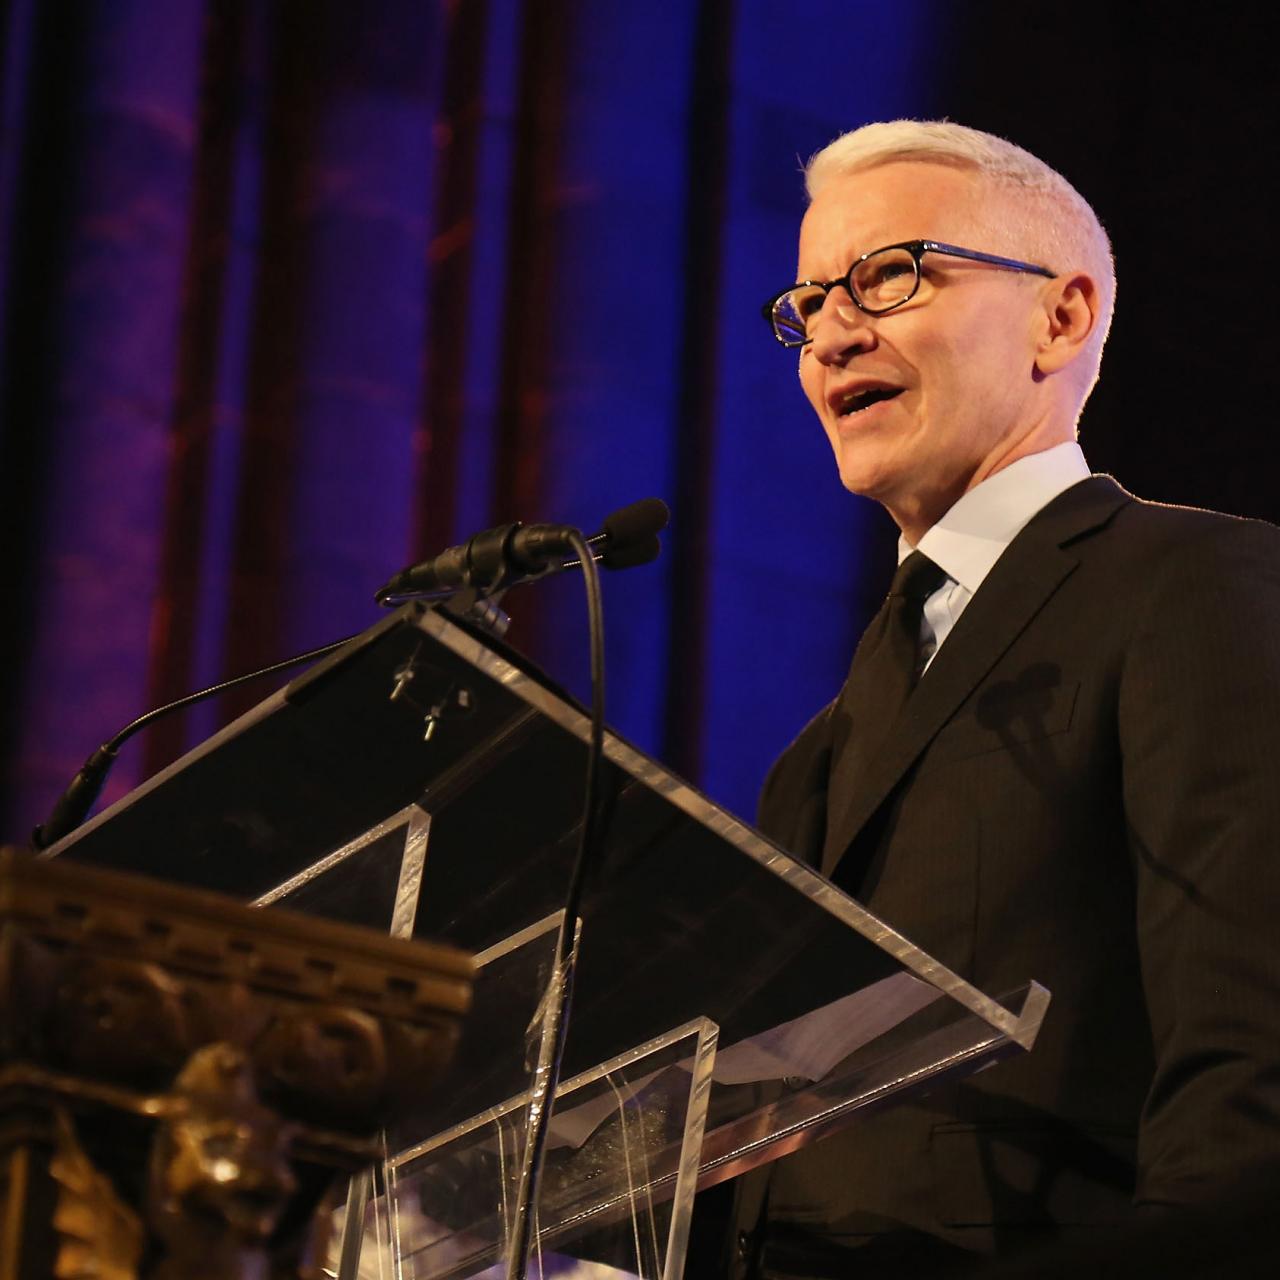 5 of Anderson Cooper's most memorable on-air moments - Poynter